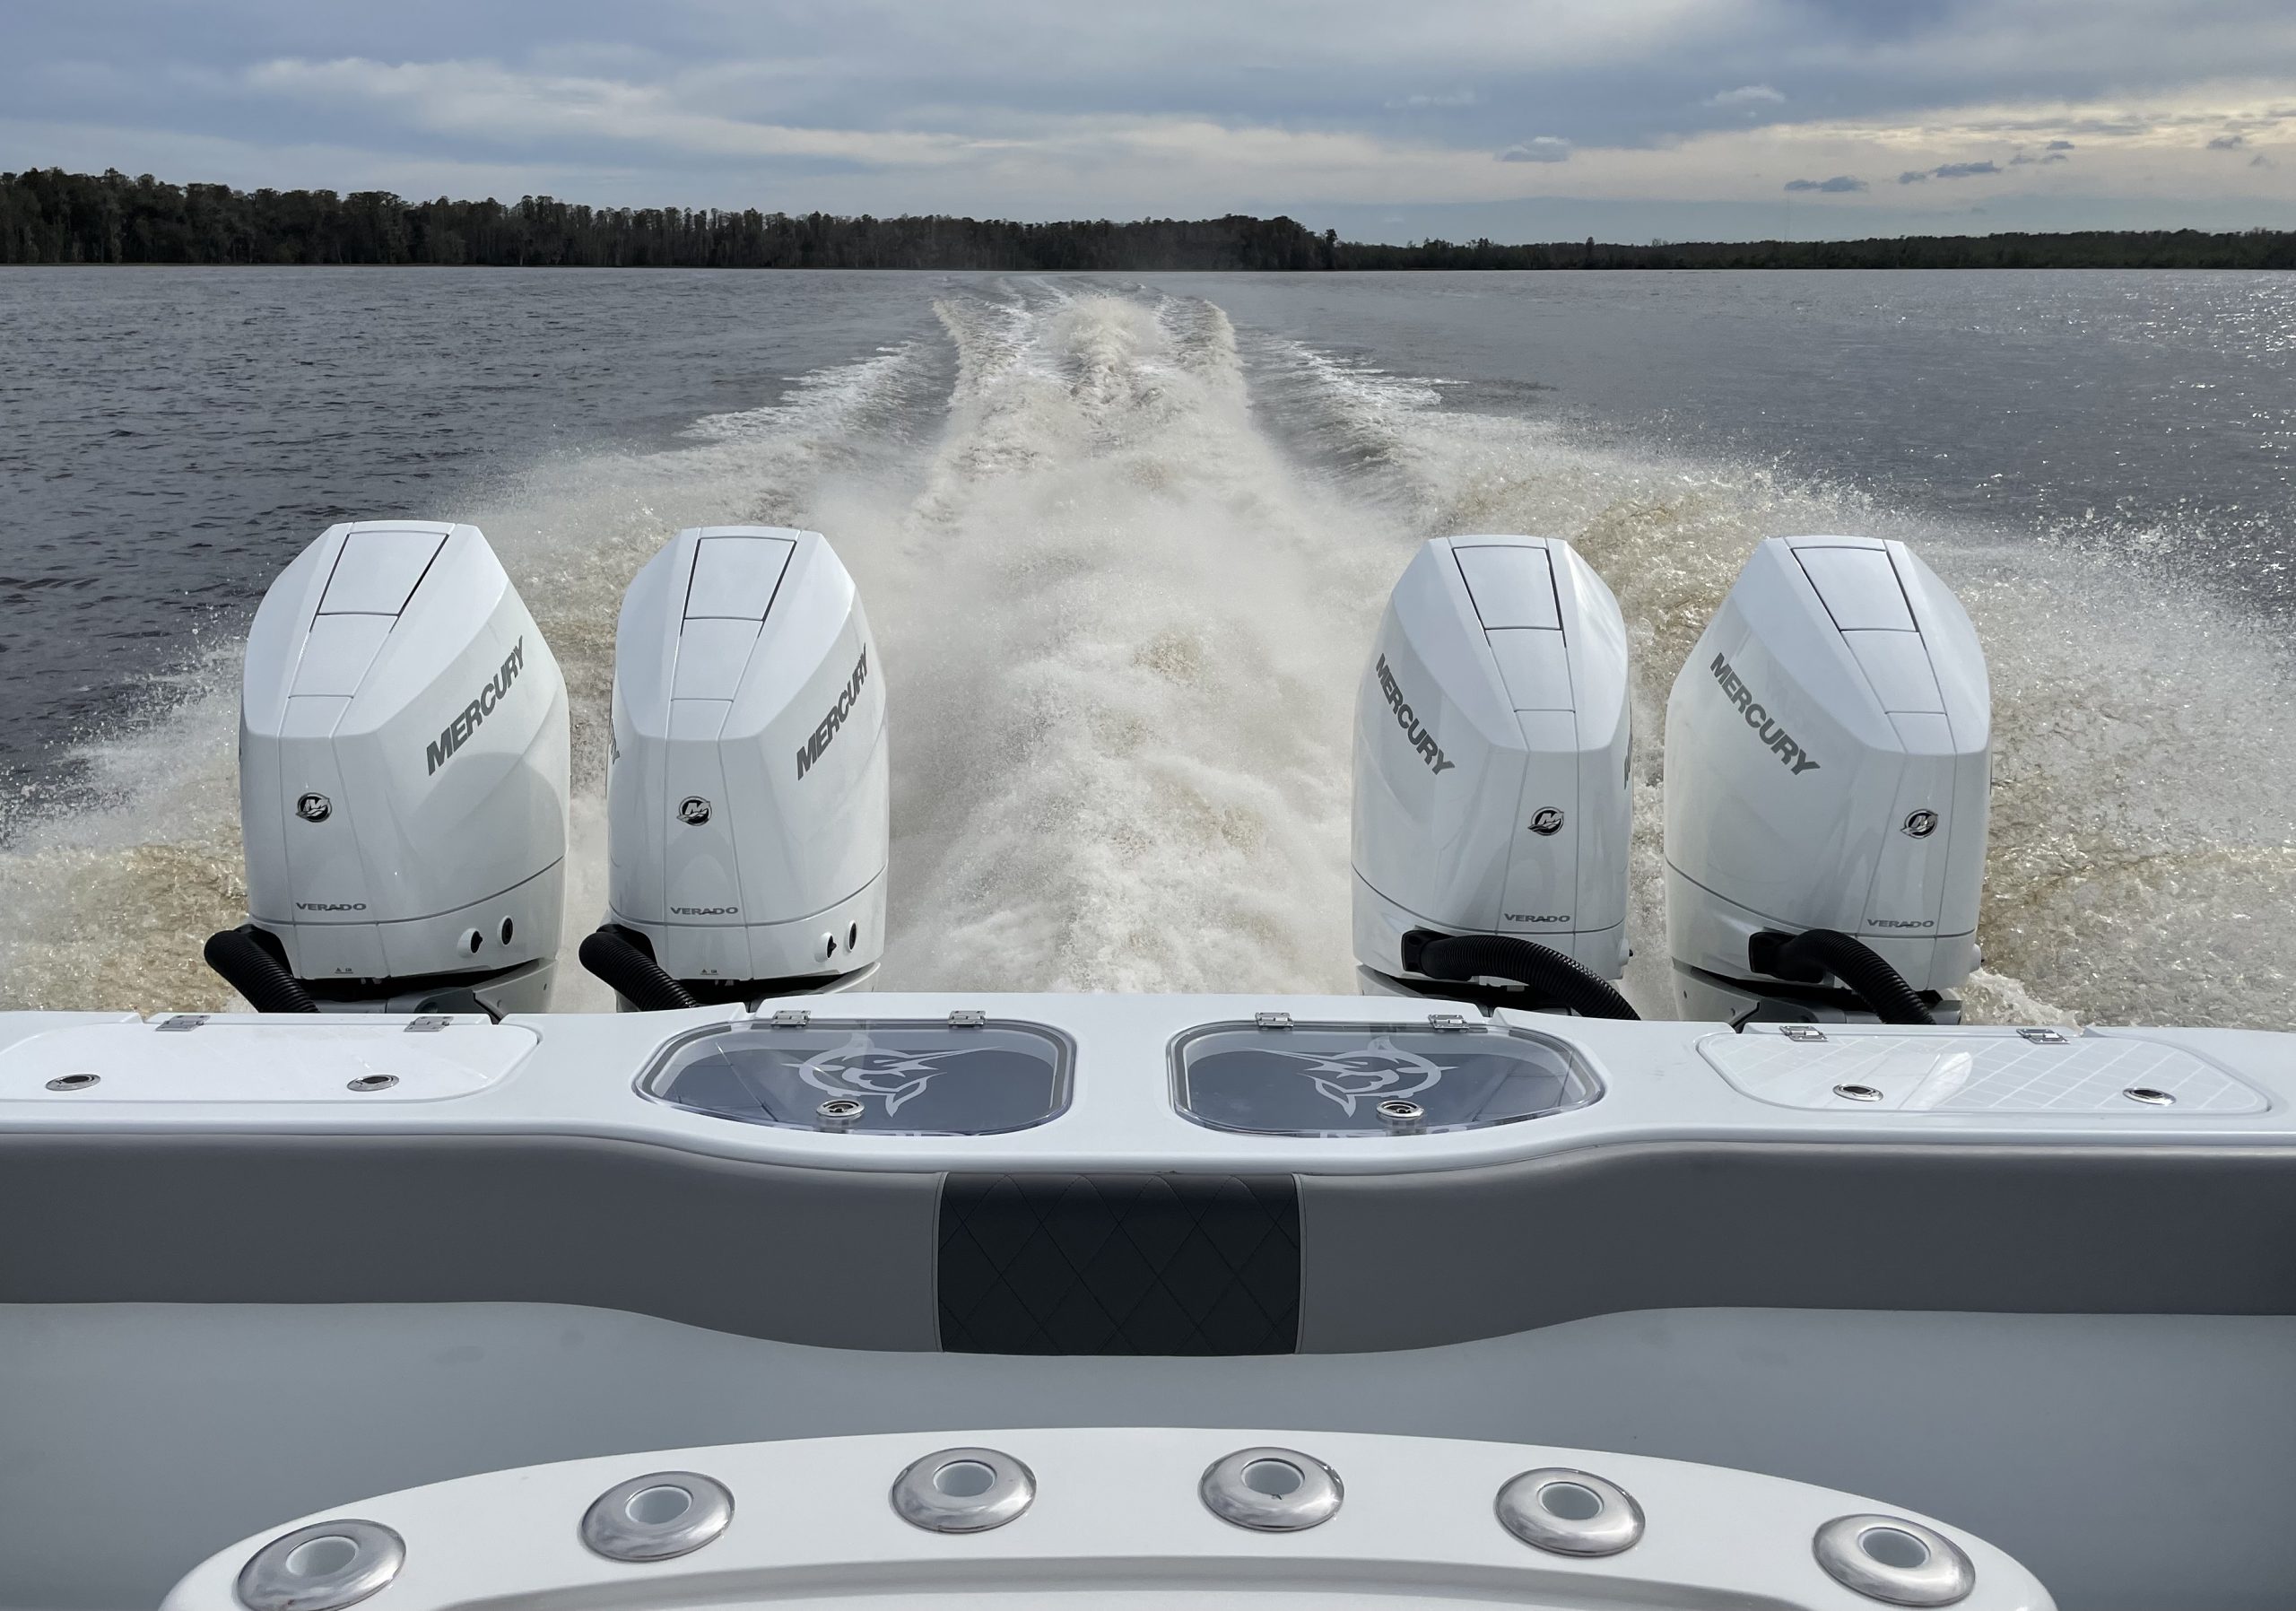 Mercury V10 Outboards Introduced - First Test Reviews thumbnail